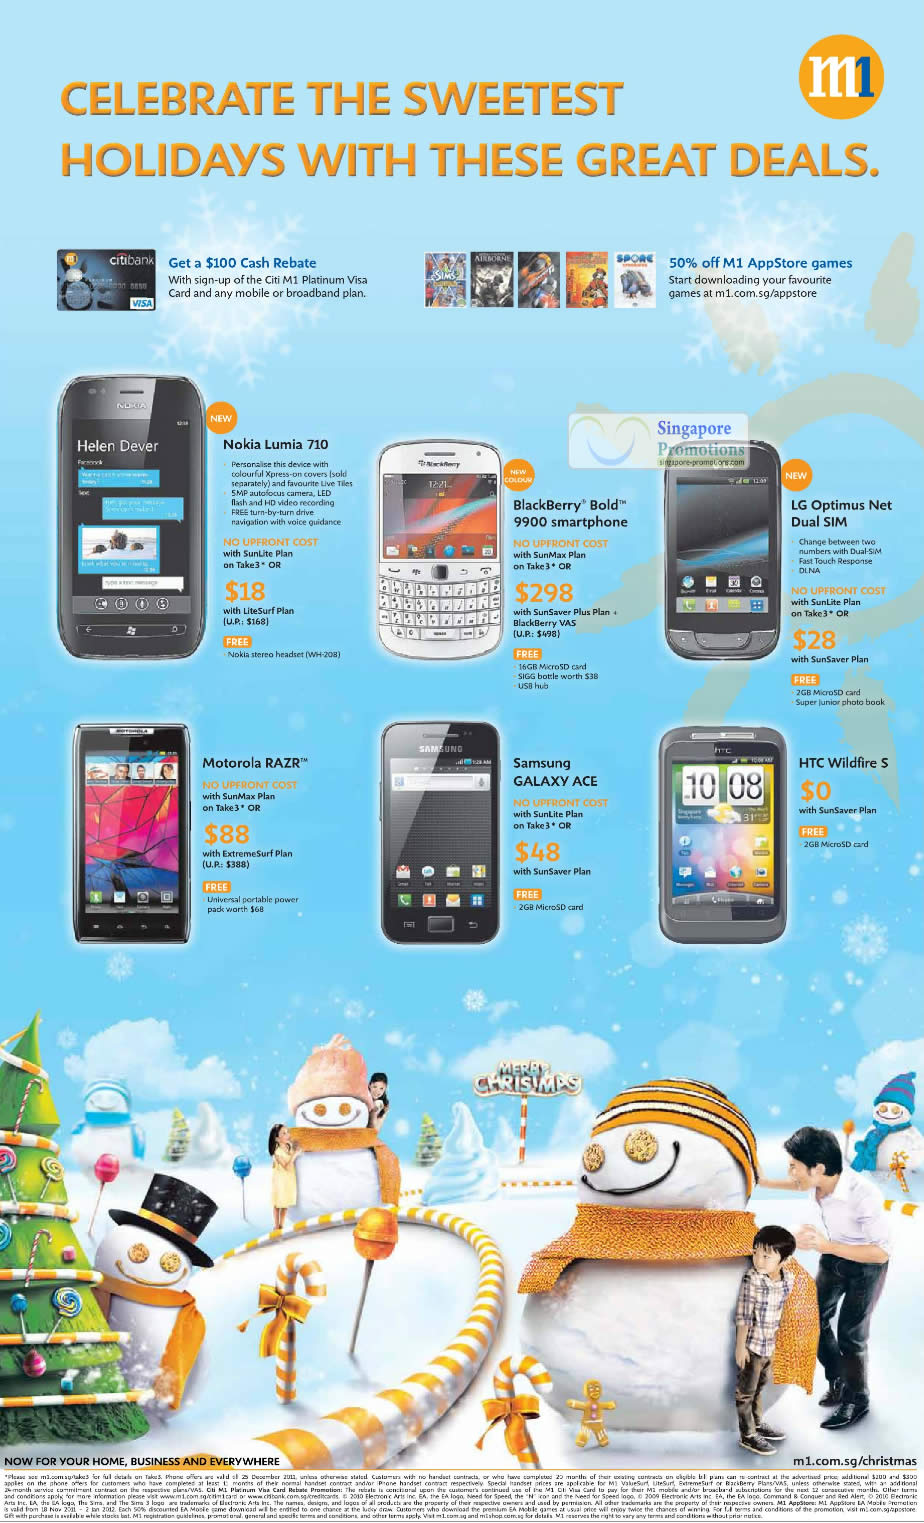 Featured image for M1 Smartphones, Tablets & Home/Mobile Broadband Offers 17 - 23 Dec 2011